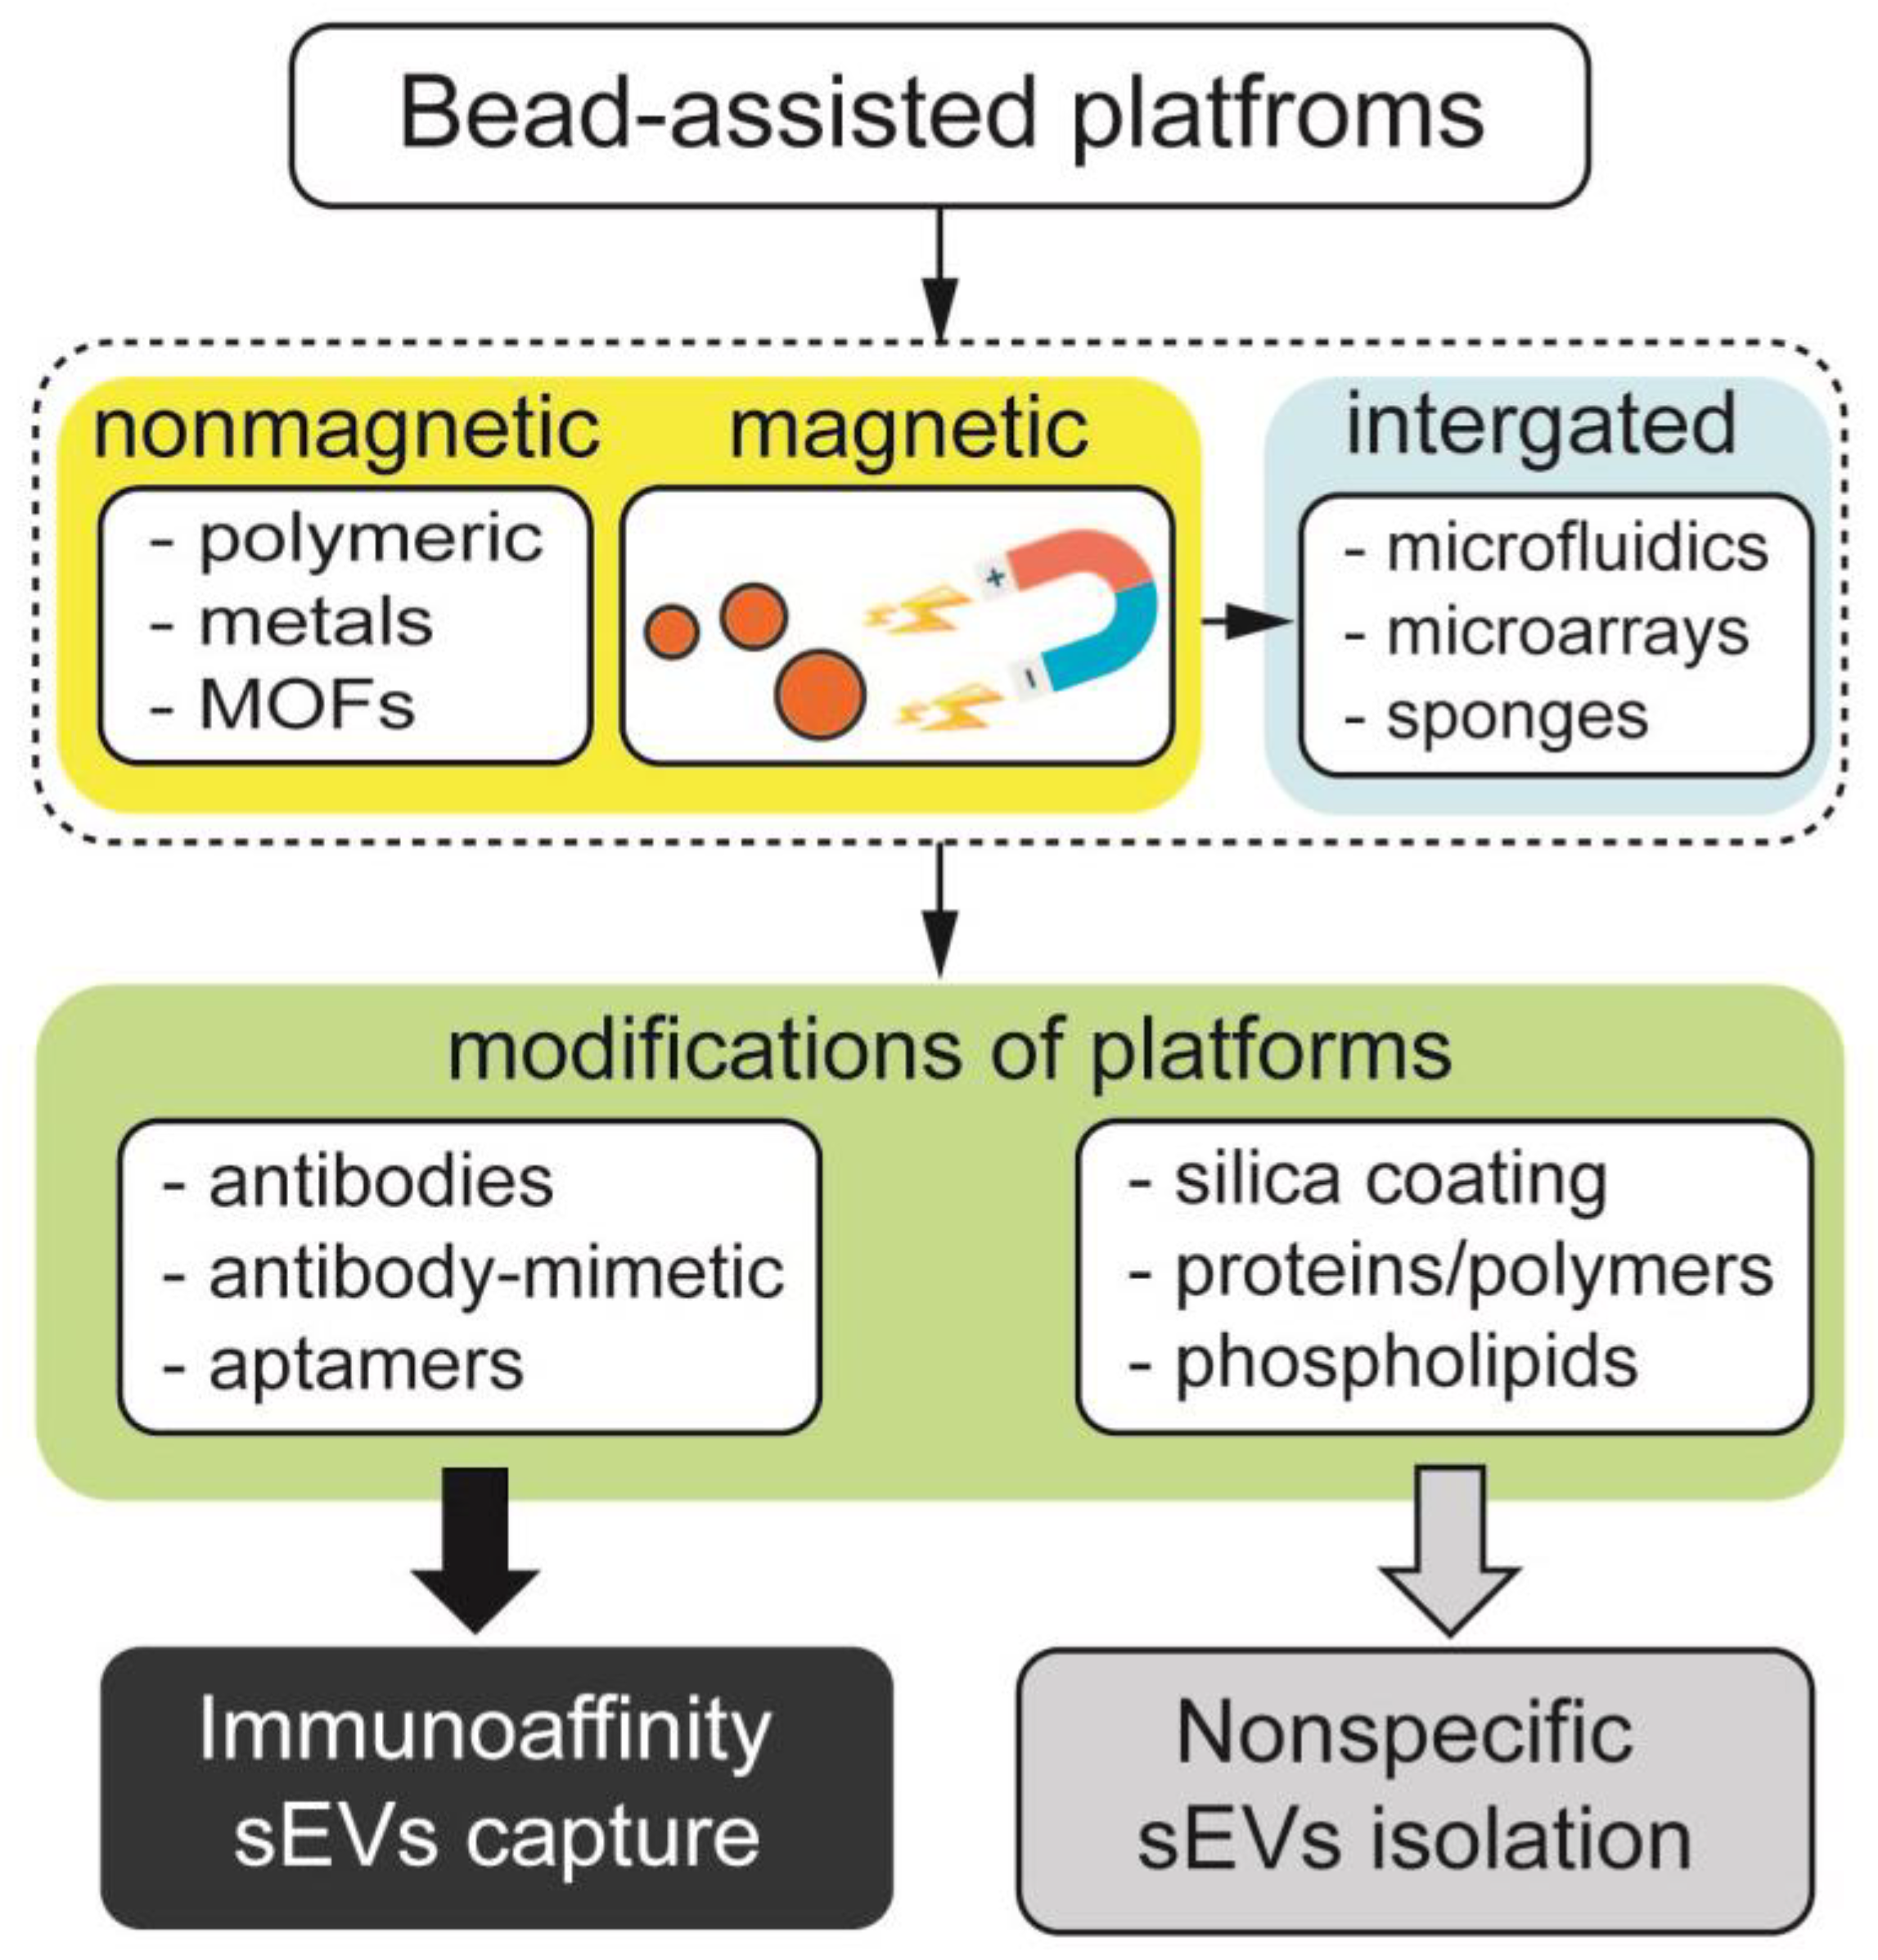 Biosensors | Free Full-Text | Progress in Isolation and Molecular Profiling  of Small Extracellular Vesicles via Bead-Assisted Platforms